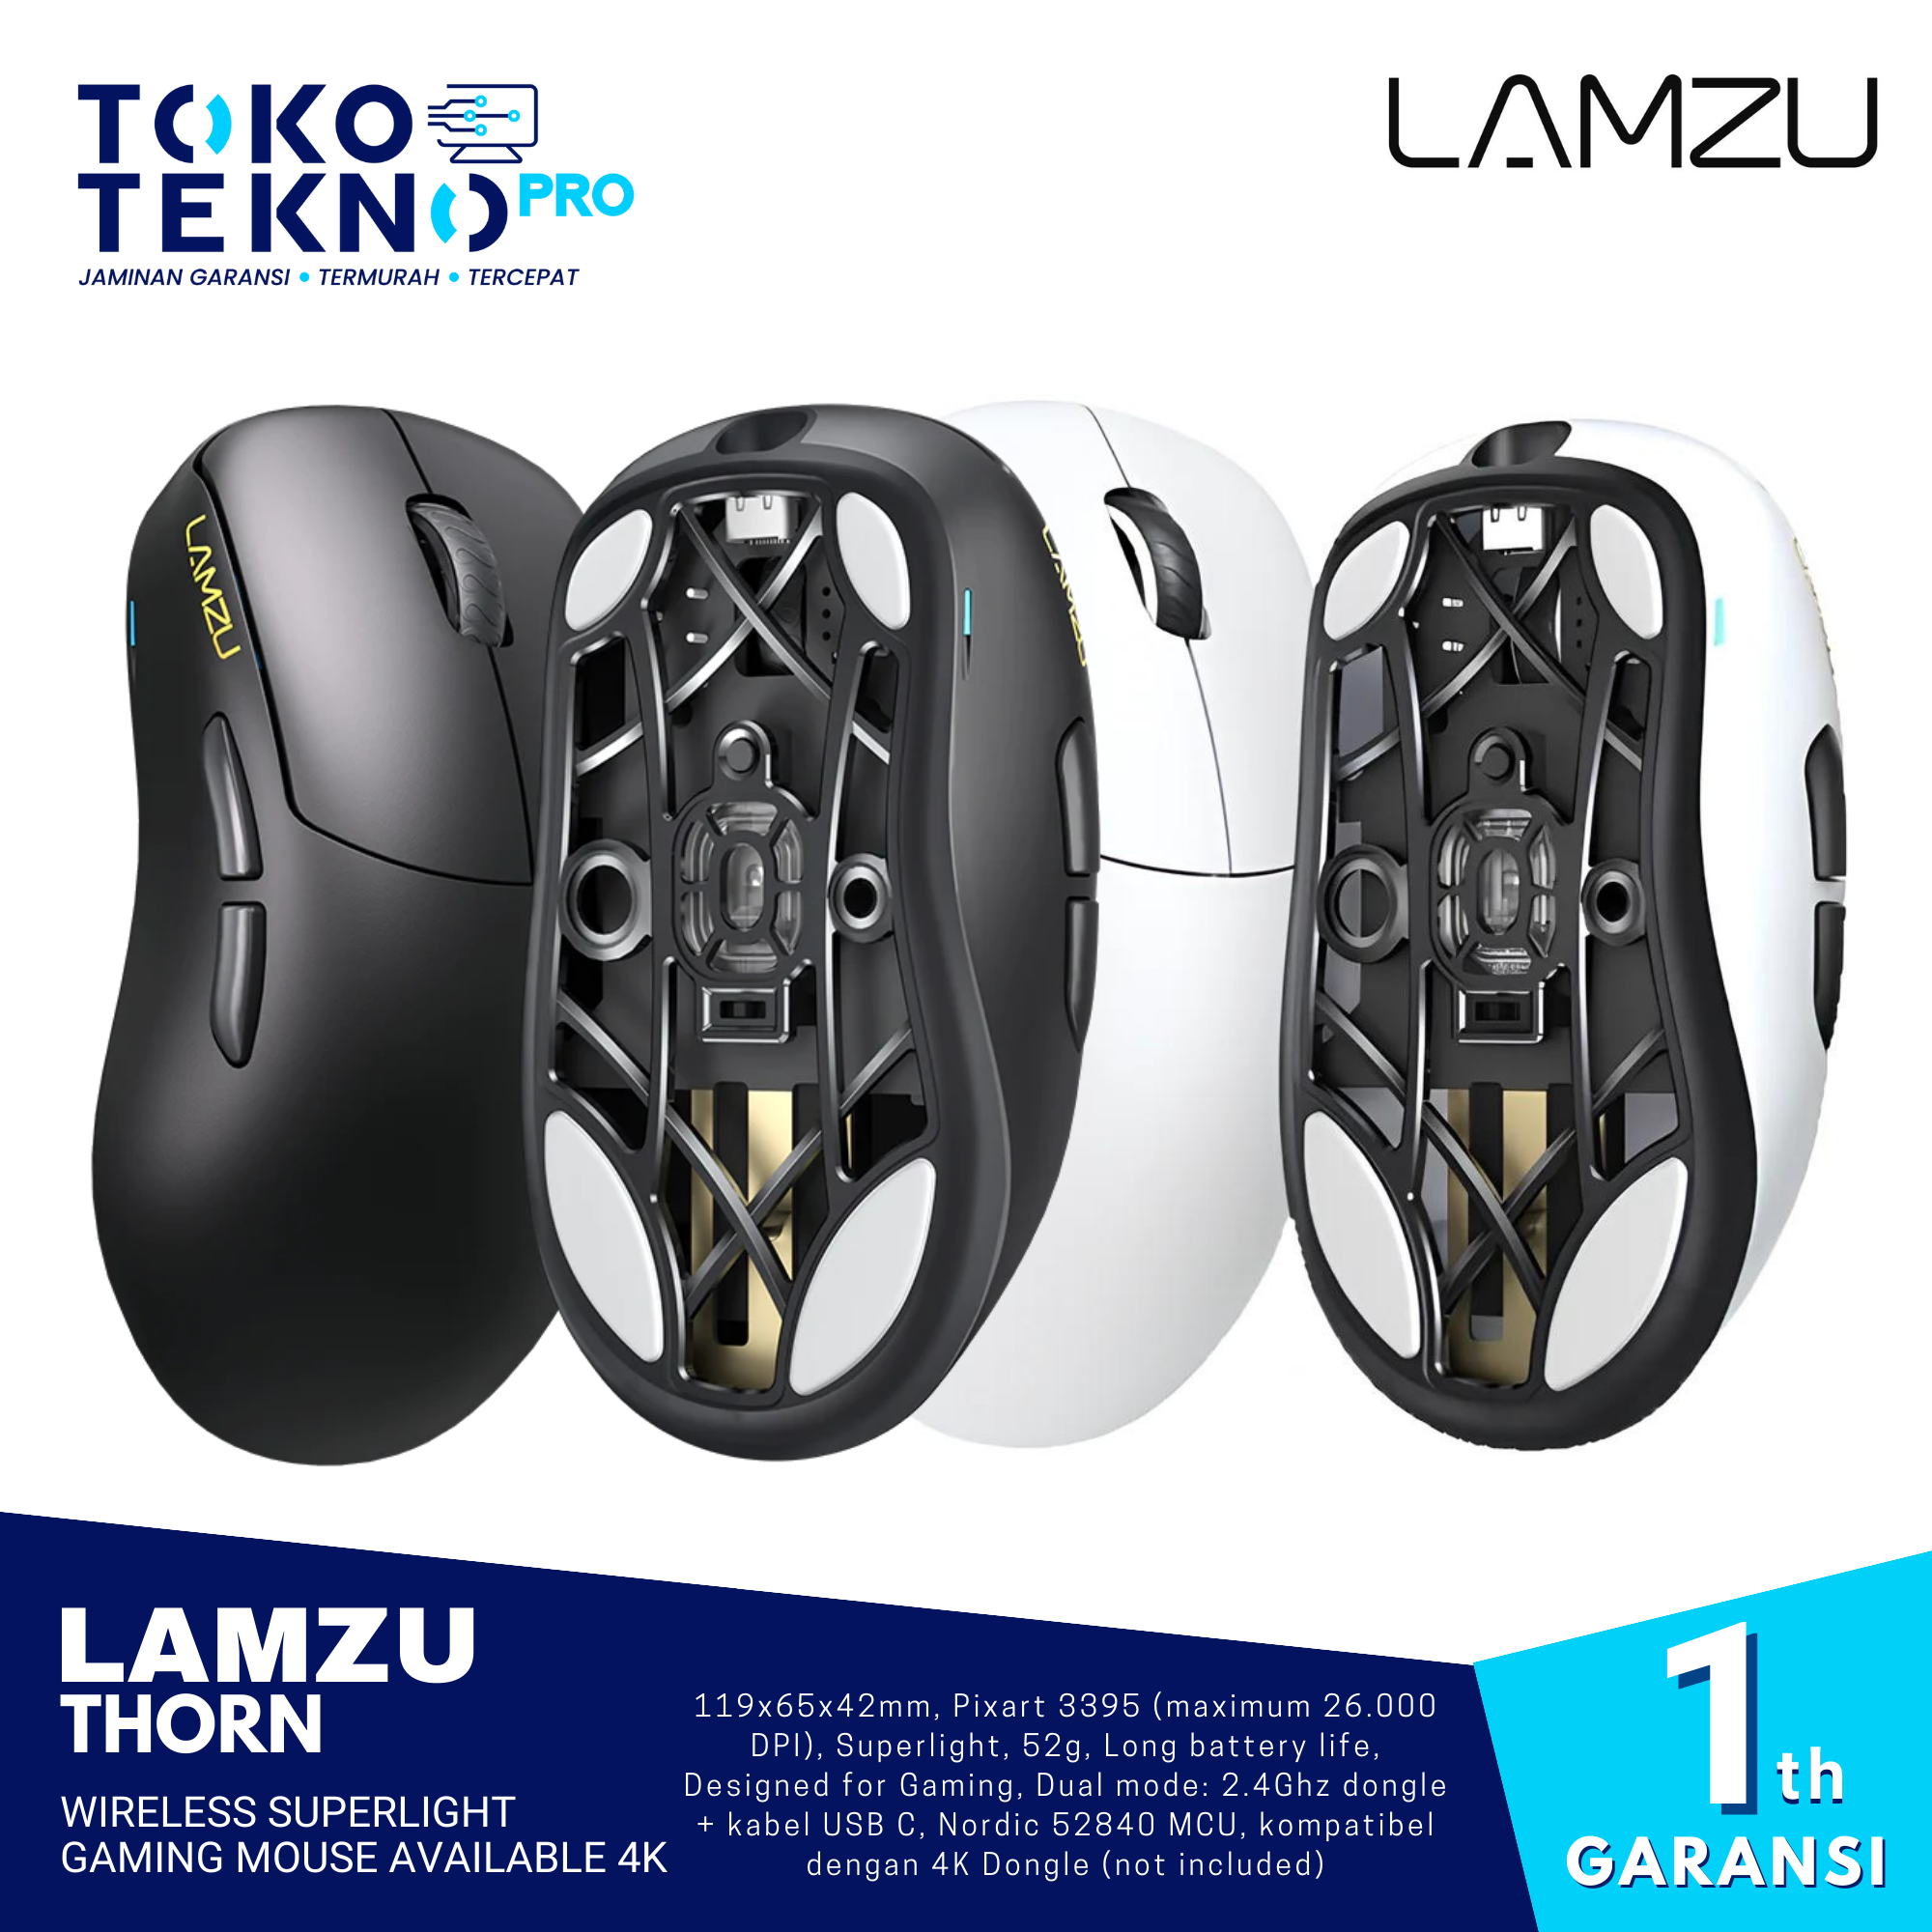 Lamzu Thorn Wireless Superlight Gaming Mouse Available 4K